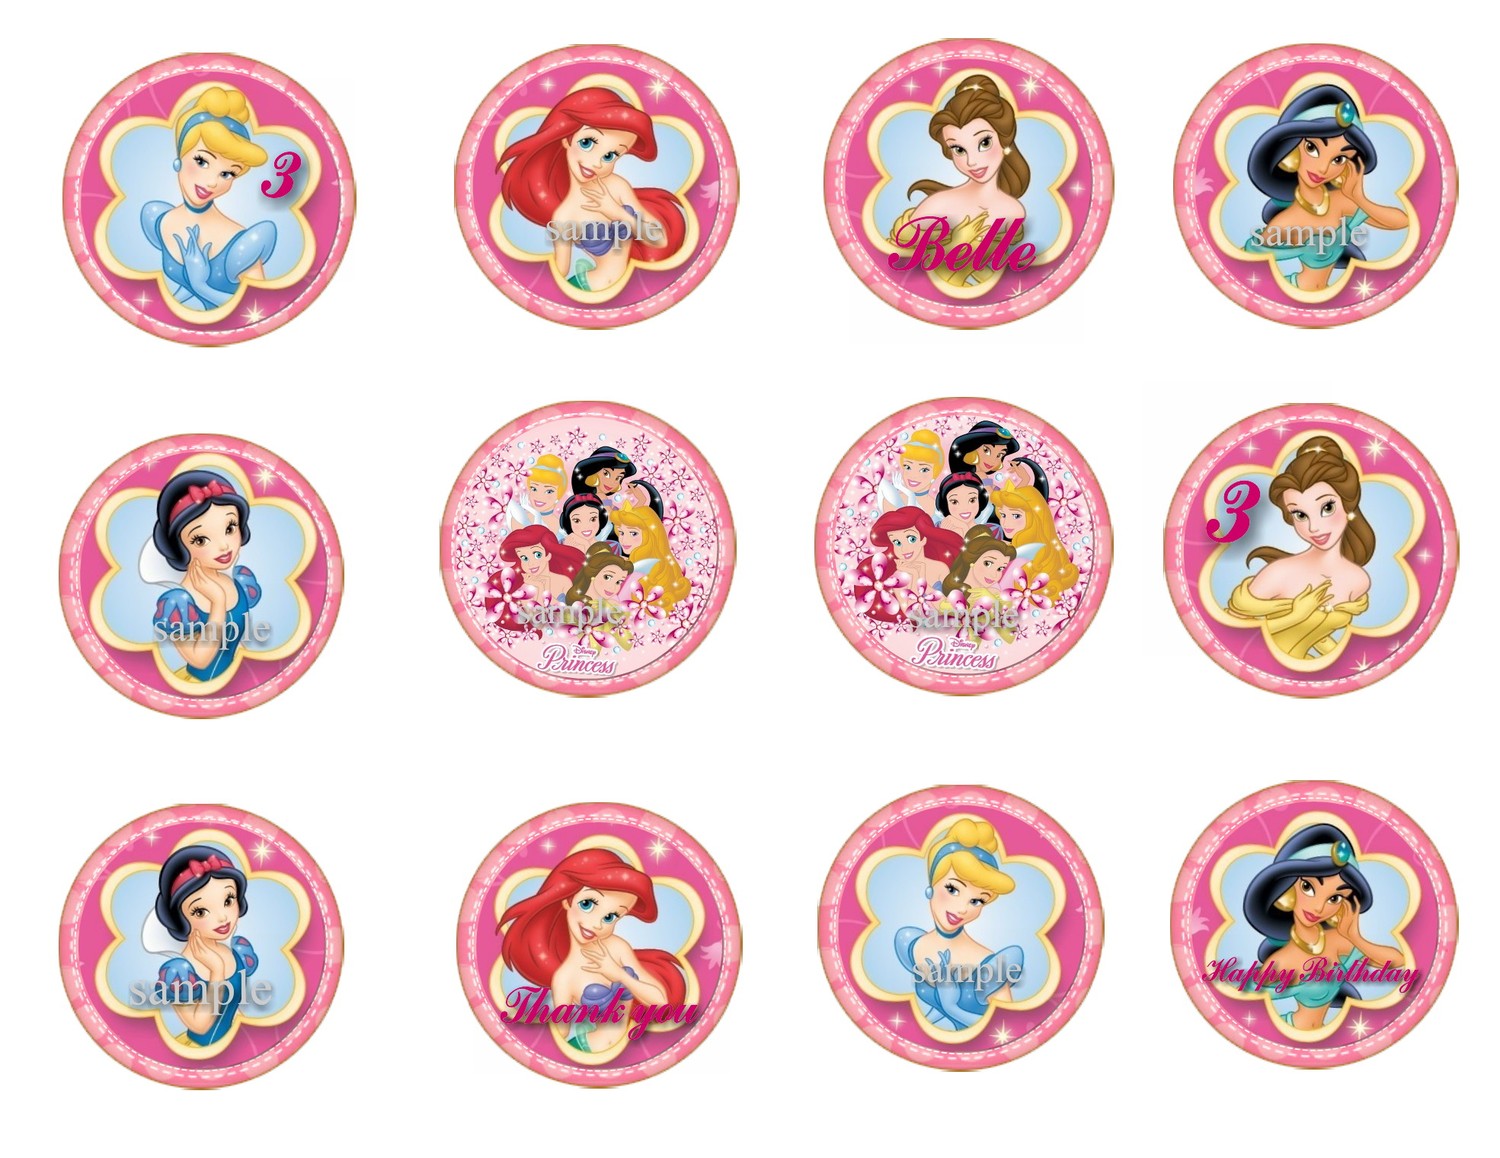 5 Best Images of Free Printable Princess Cupcake Toppers Disney